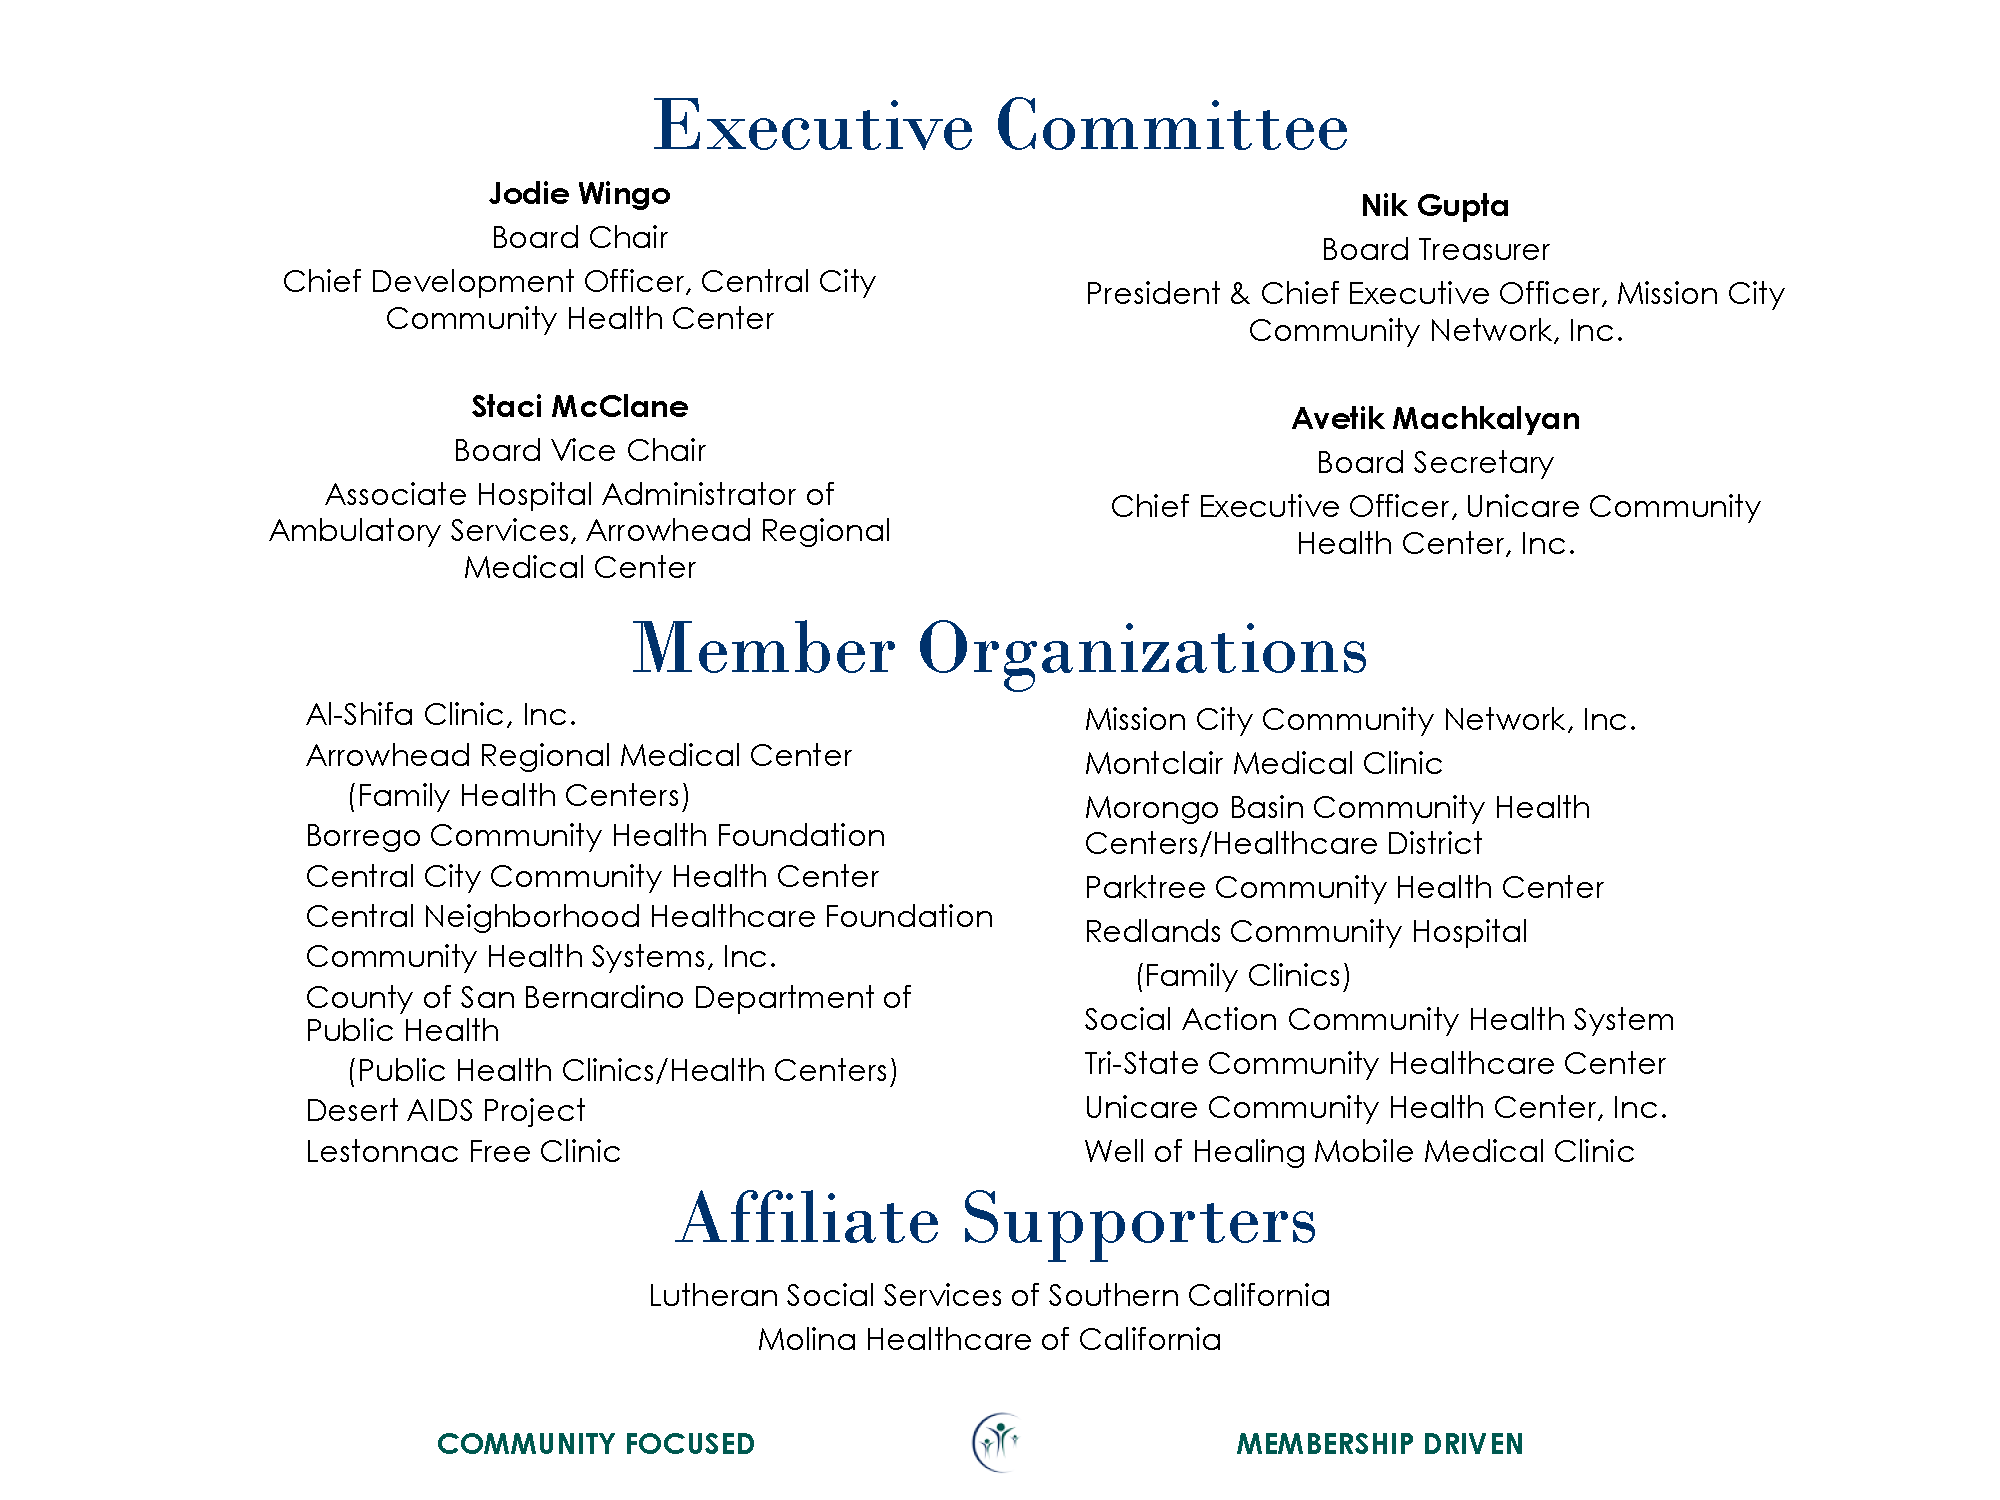 CHAISR Exec Committee, Members, and Affiliate Supporters